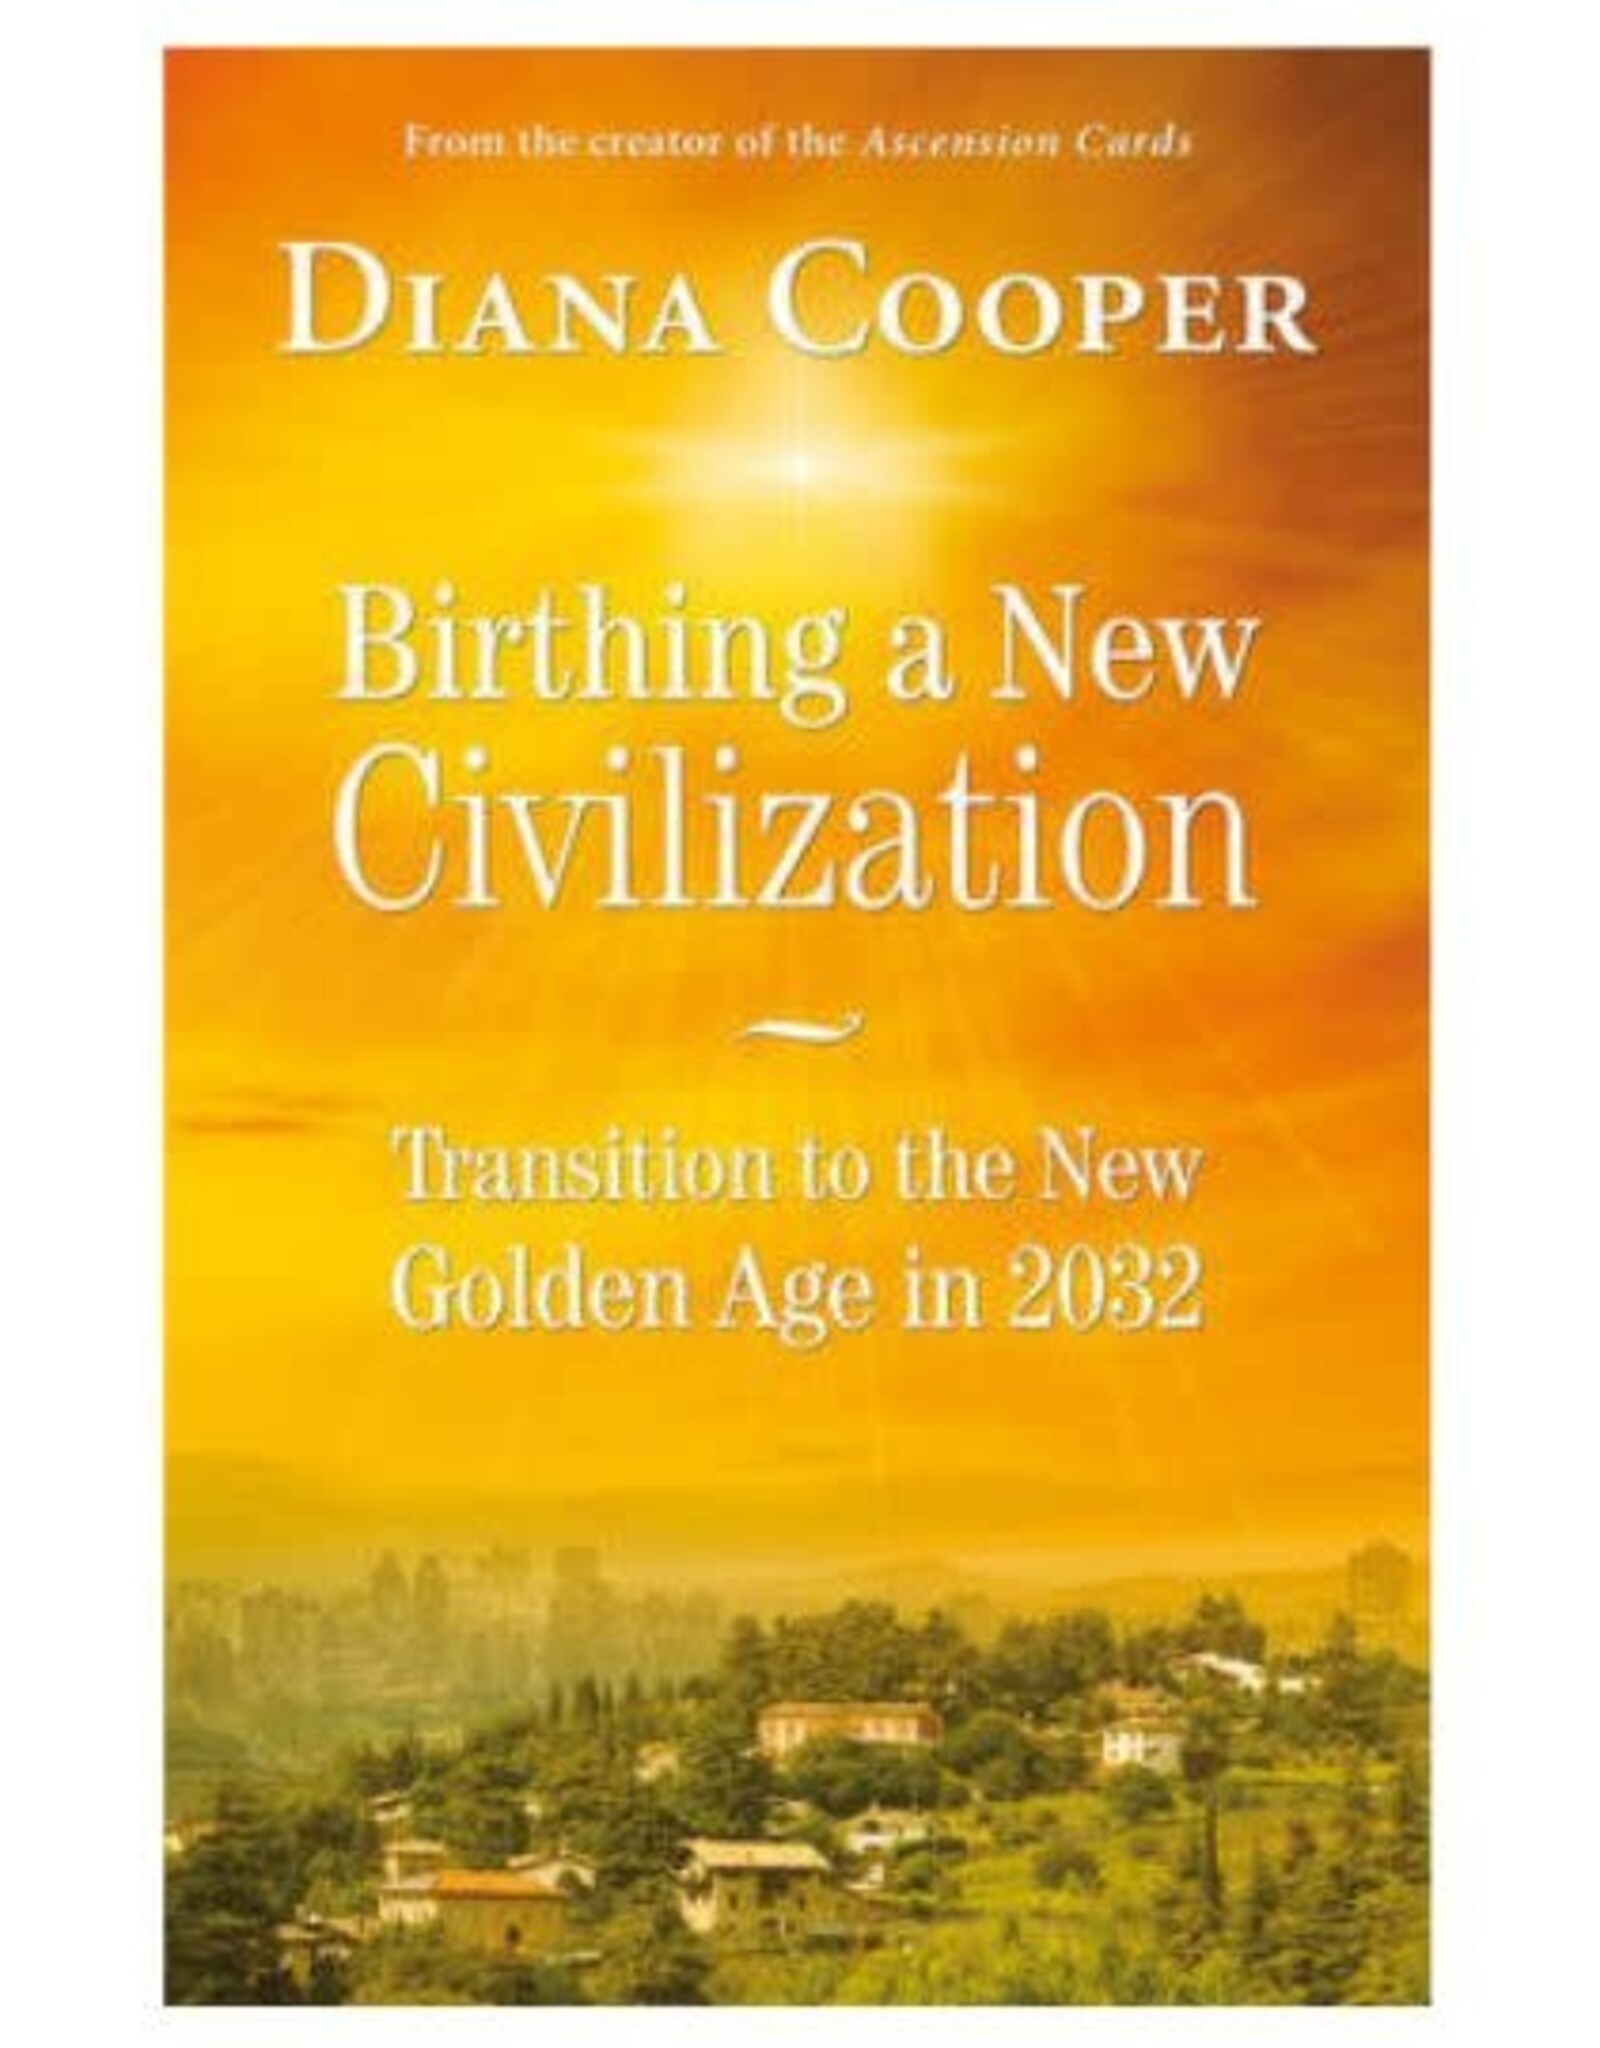 Diana Cooper Birthing a New Civilization by Diana Cooper